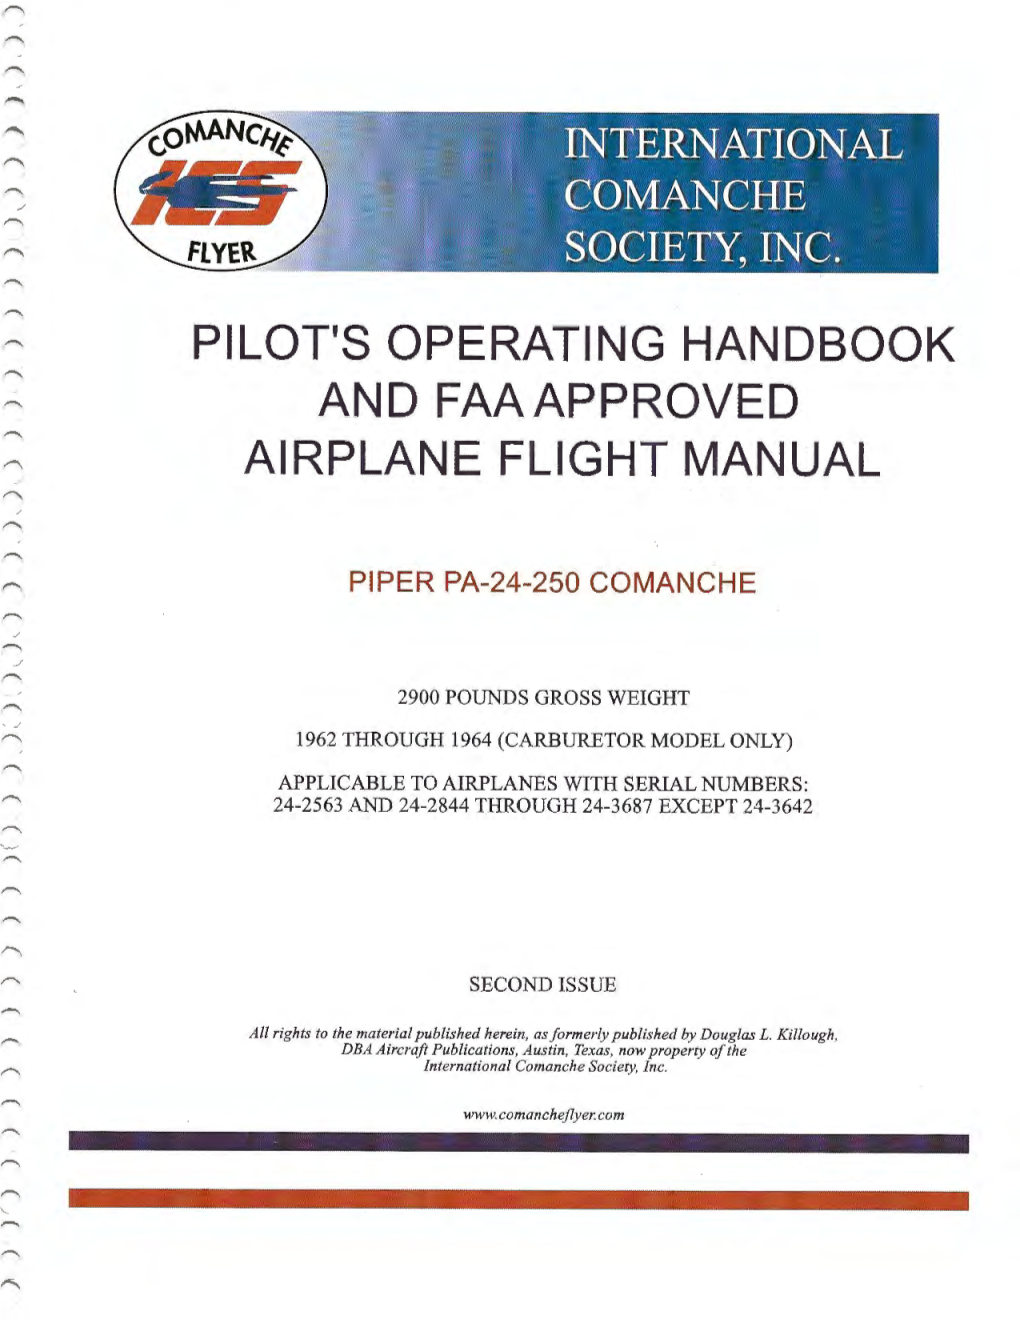 Pilot's Operating Handbook and Faaapproved Airplane Flight Manual